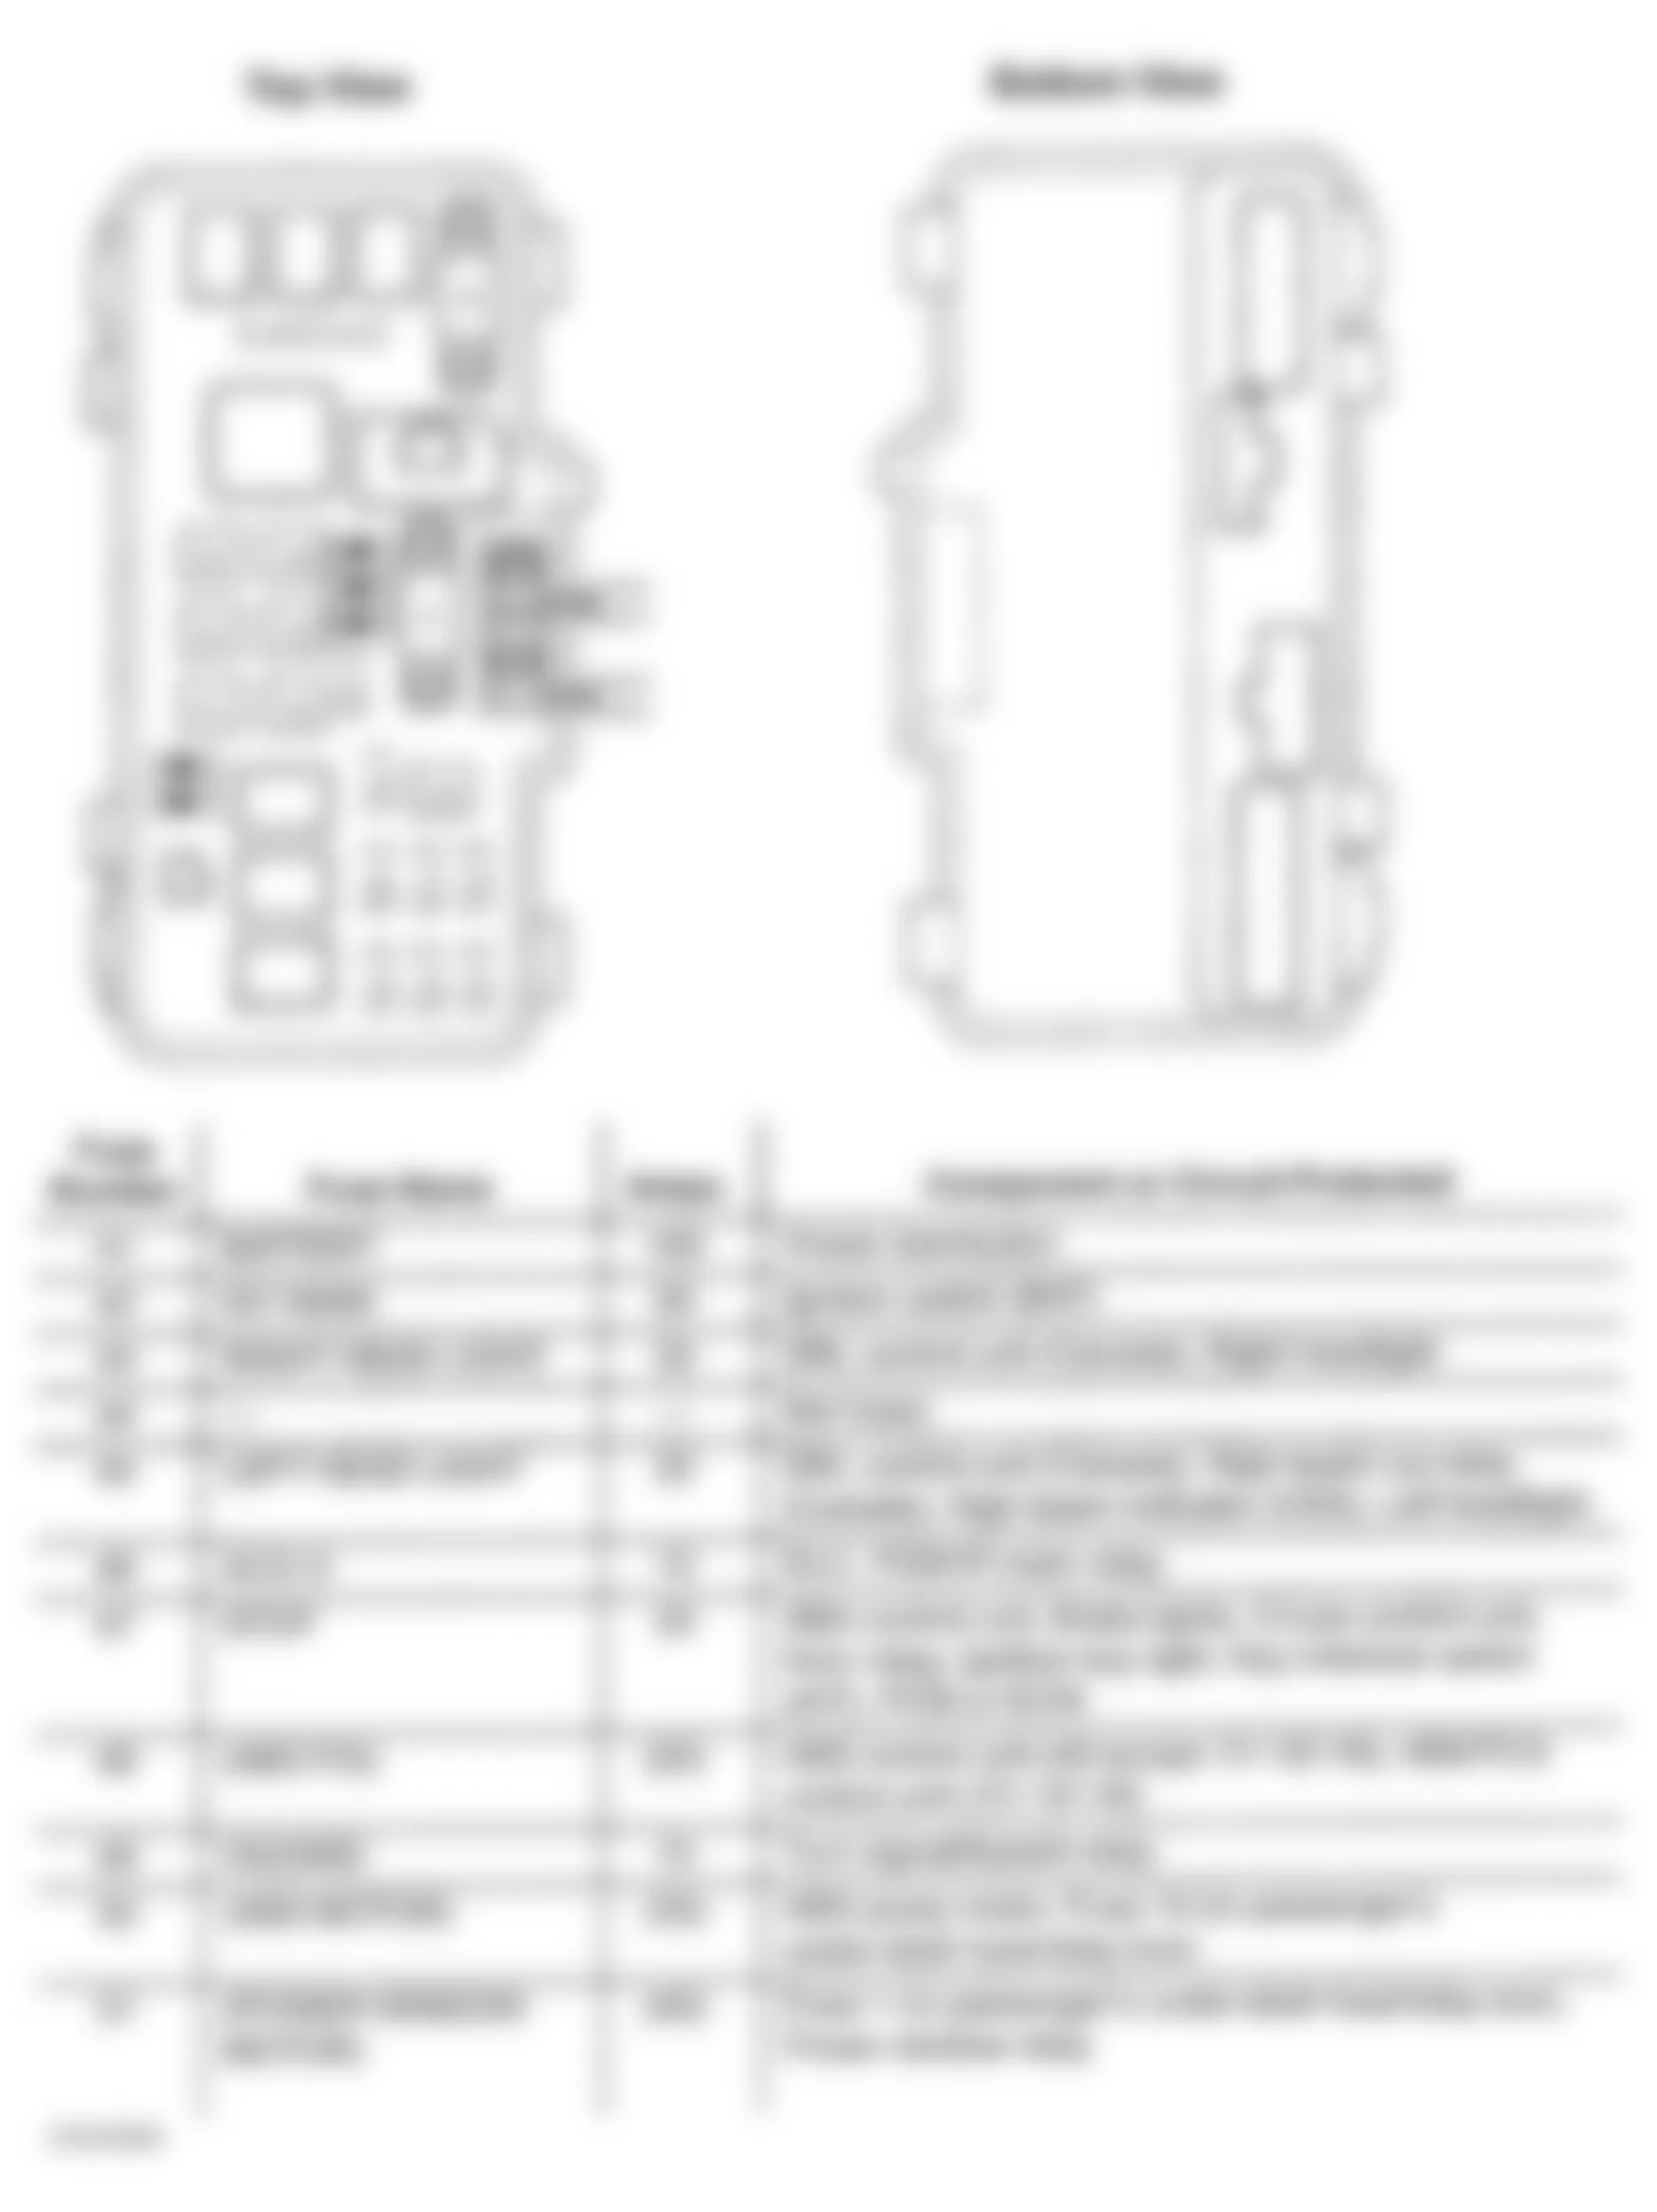 Honda Accord LX 2002 - Component Locations -  Identifying Under-Hood Fuse/Relay Box Components (1 Of 2)